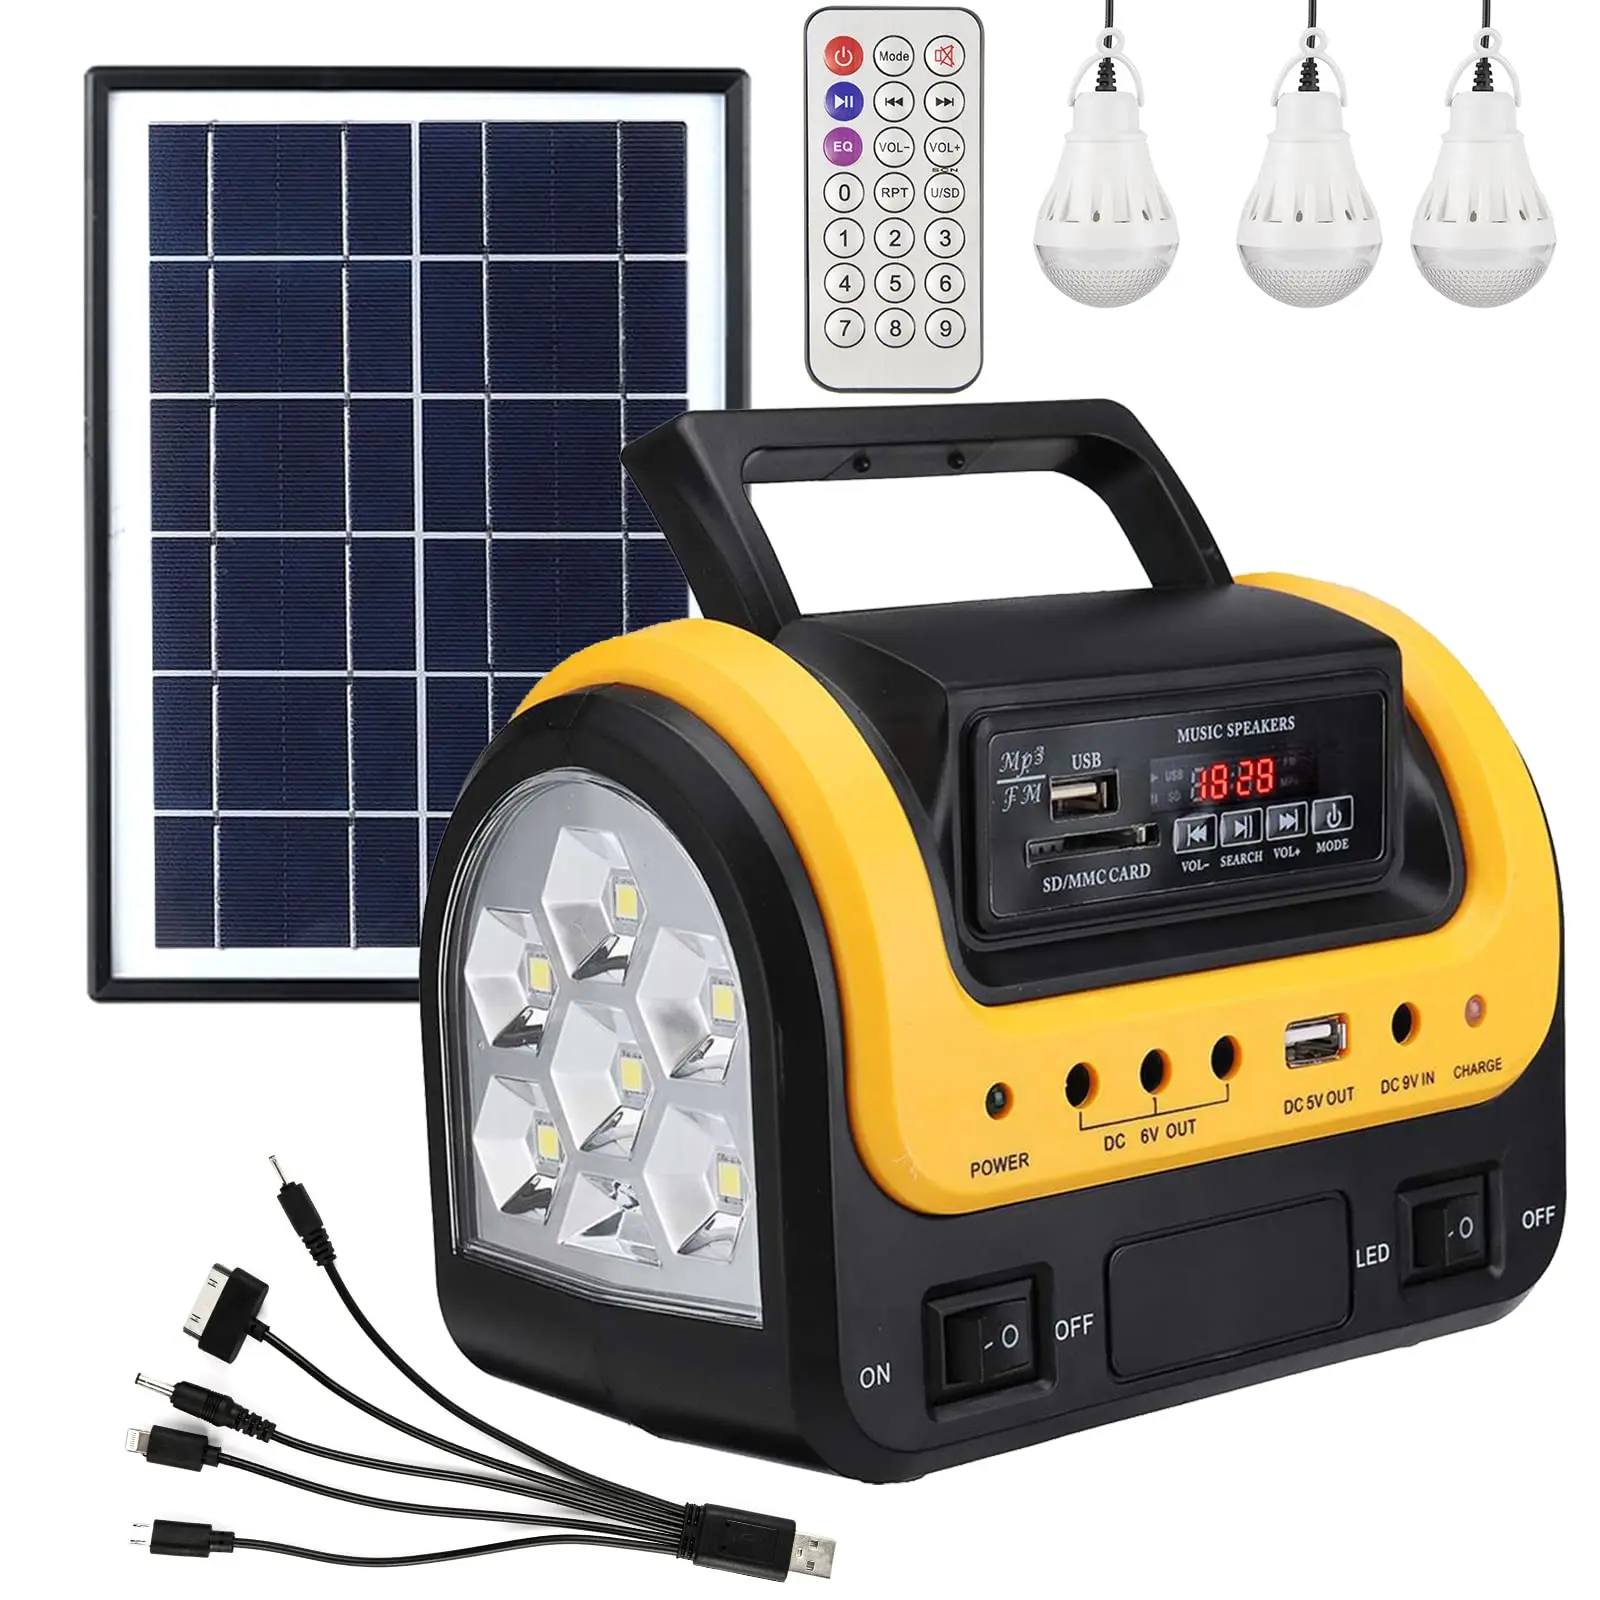 With Solar Panels Portable Solar Power Station Lifepo4 With 